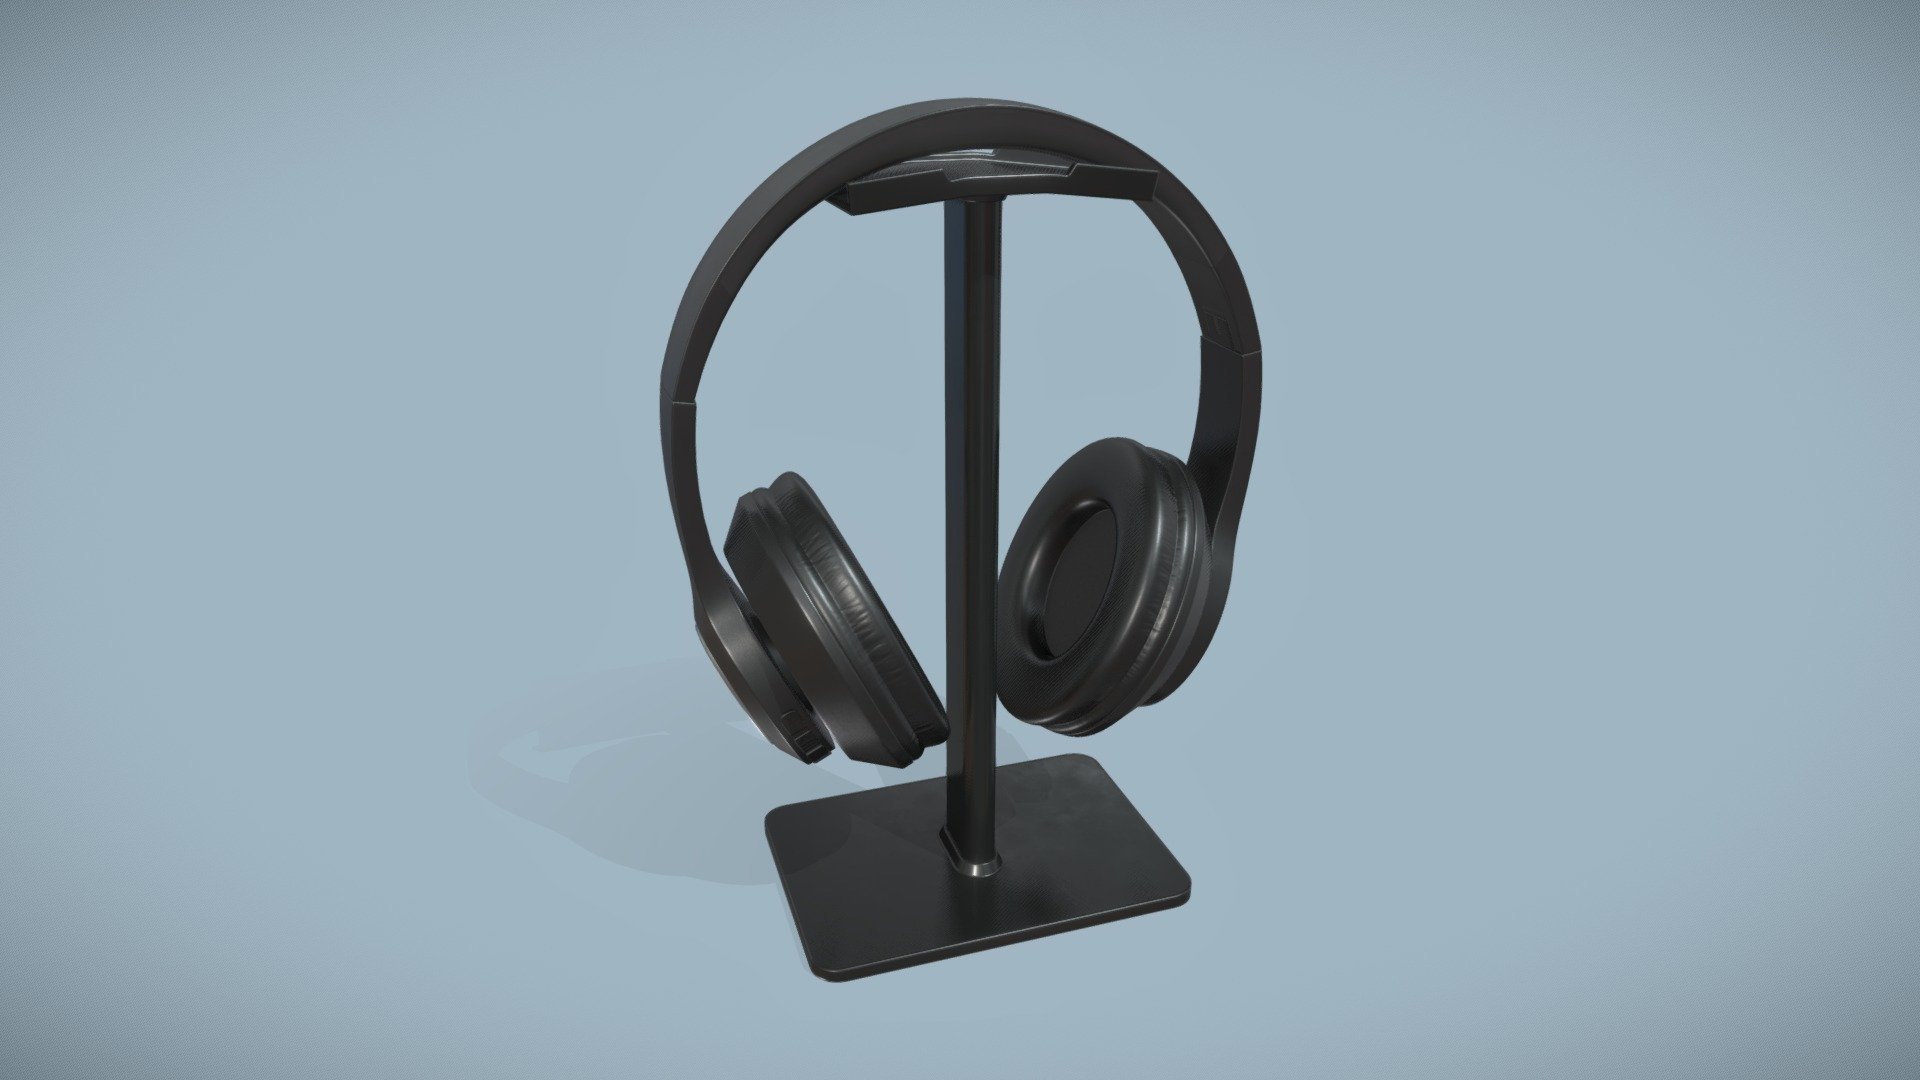 Game ready low-poly Headphones model with PBR textures for game engines/renderers.

This product is intended for game/real time/background use. This model is not intended for subdivision.

Features:




Geometry is triangulated to ensure best shading

All materials and objects named appropriately

Scaled to approximate real world size

Polycount: 11186 tris, 5843 vertices

No special plugins needed

.obj and .fbx versions exported from Blender 2.83

Textures:




Texture resolution: 4096x4096

Texture formats: PNG

General PBR Metallic/Roughness  textures: BaseColor, Metallic, Roughness, Normal(DirectX), Normal(OpenGL), AO

Unity textures: Albedo, MetallicSmoothness, Normal(OpenGL), AO

Unreal Engine 4 textures: BaseColor, OcclusionRoughnessMetallic, Normal(DirectX)

PBR Specular/Glossiness textures: Diffuse, Specular, Glossiness, Normal(DirectX), Normal(OpenGL), AO
 - Headphones - Buy Royalty Free 3D model by AshMesh 3d model